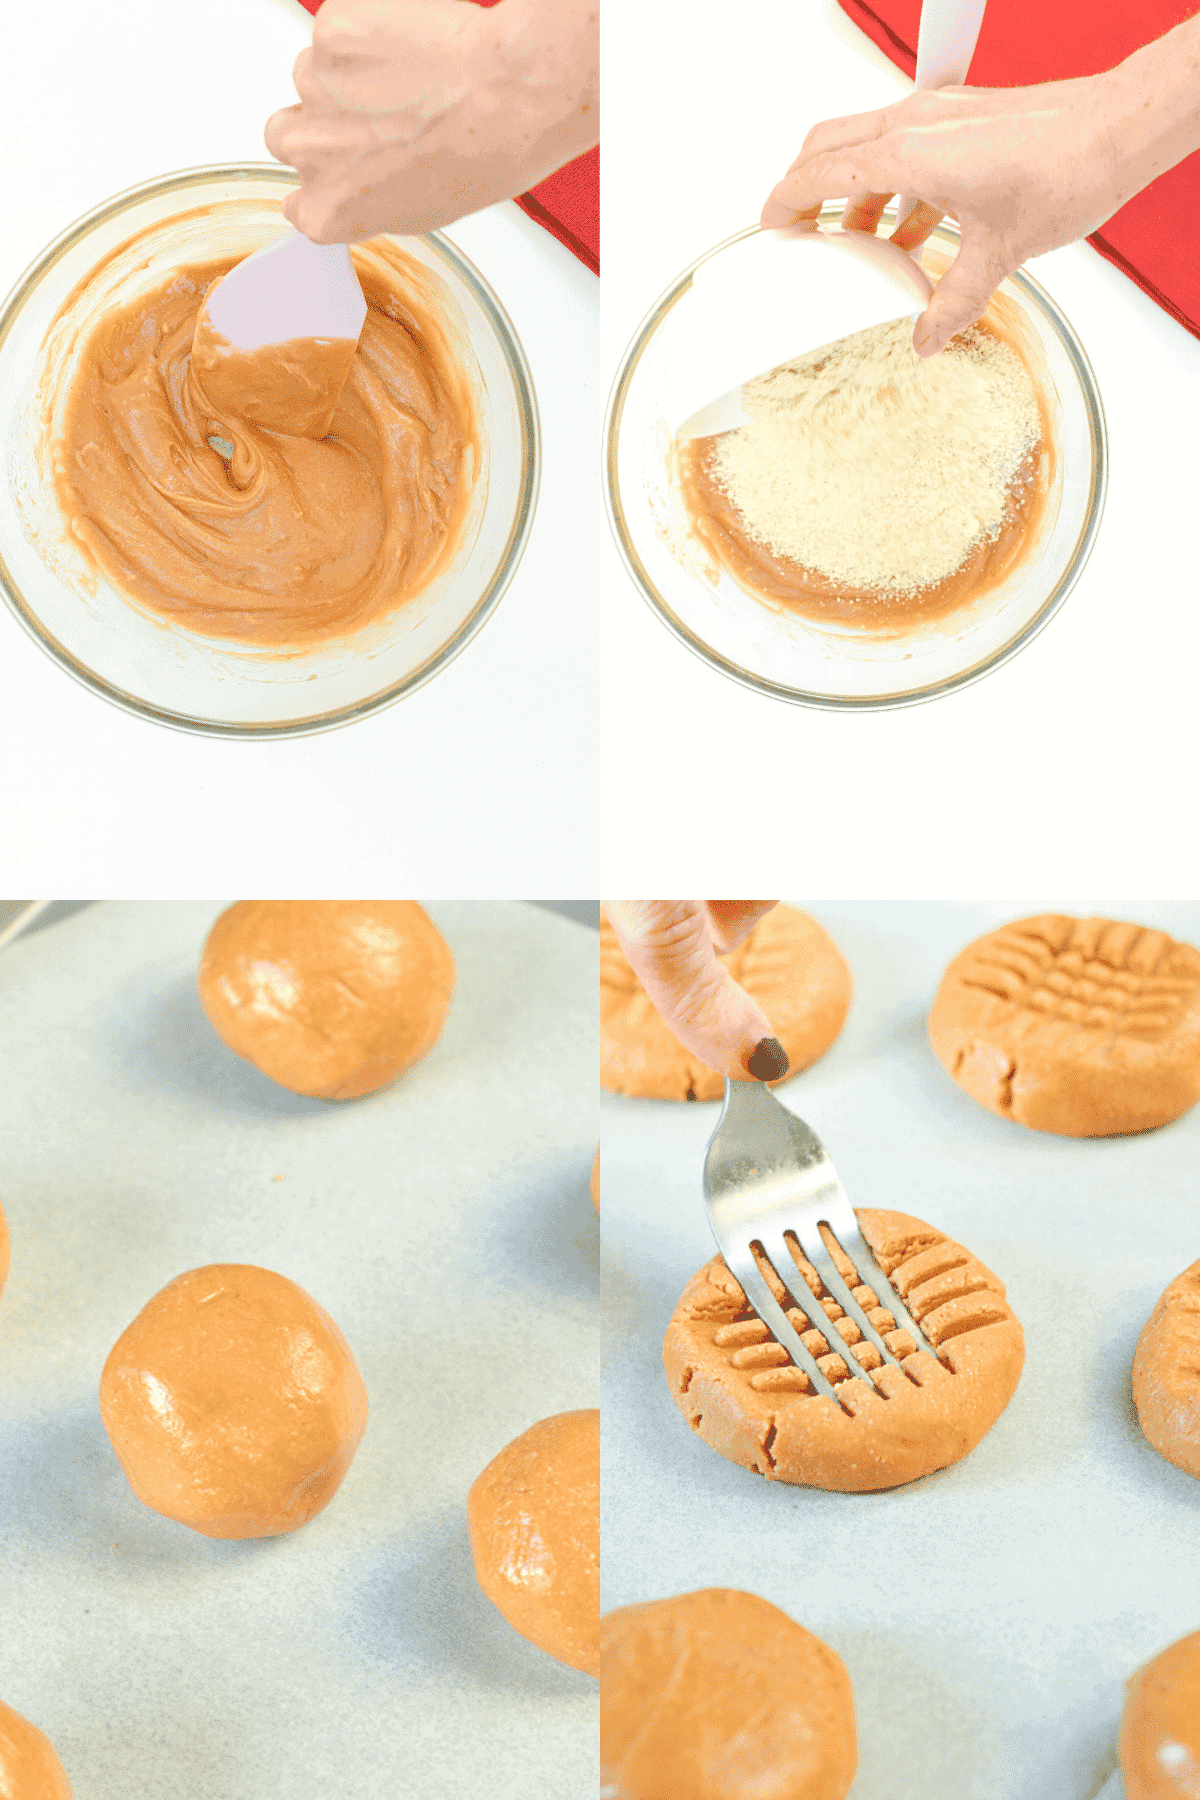 How to make Almond Flour Peanut Butter Cookies